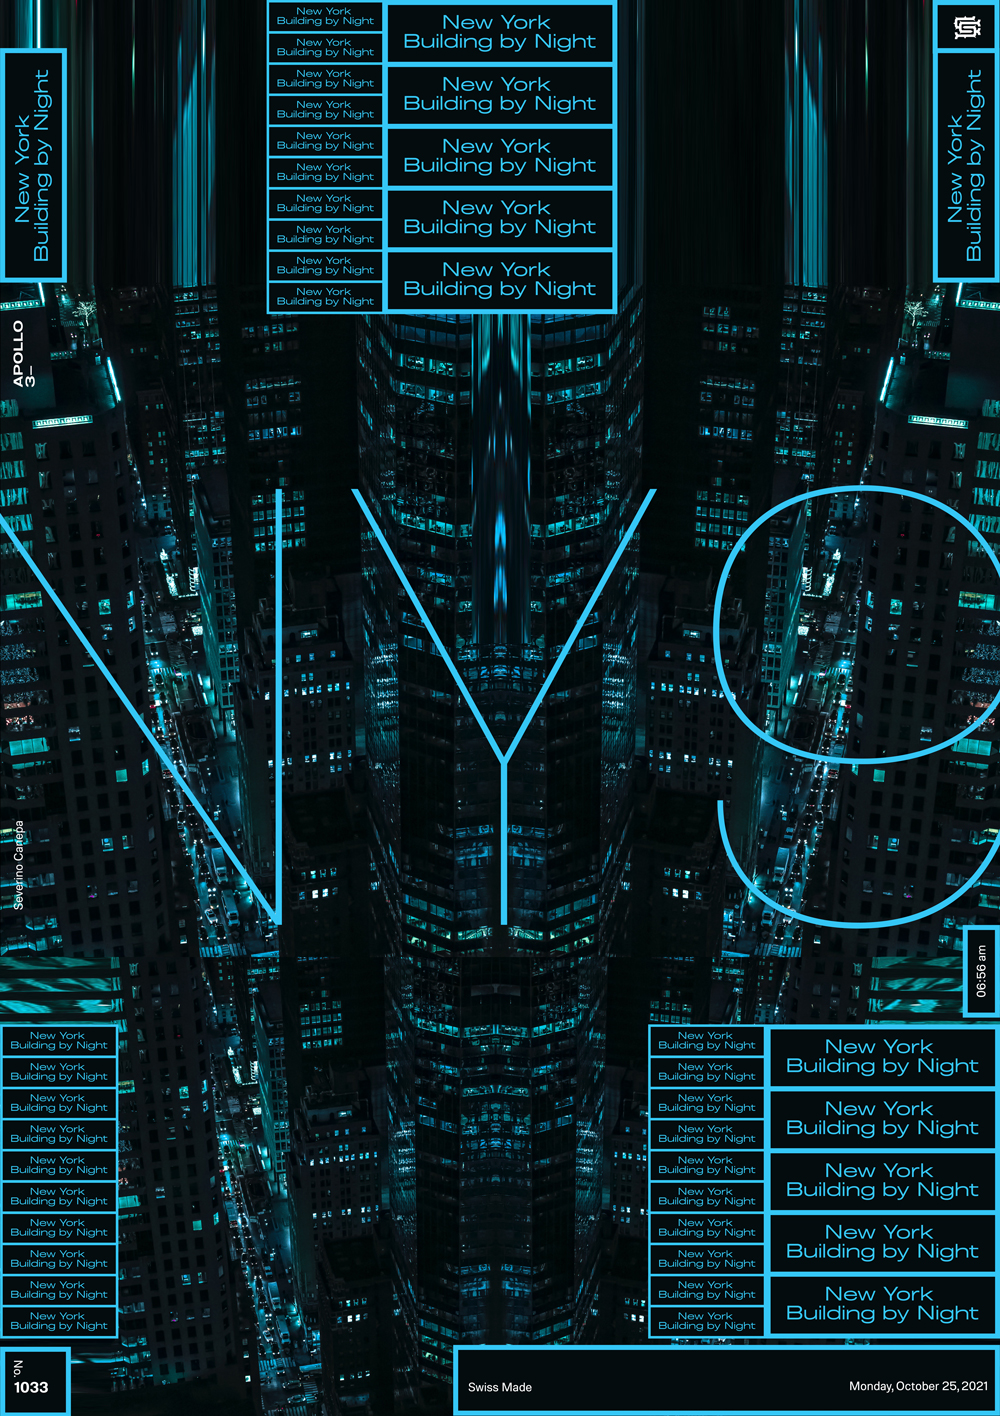 Digital art made with typography and a picture of New York and its building